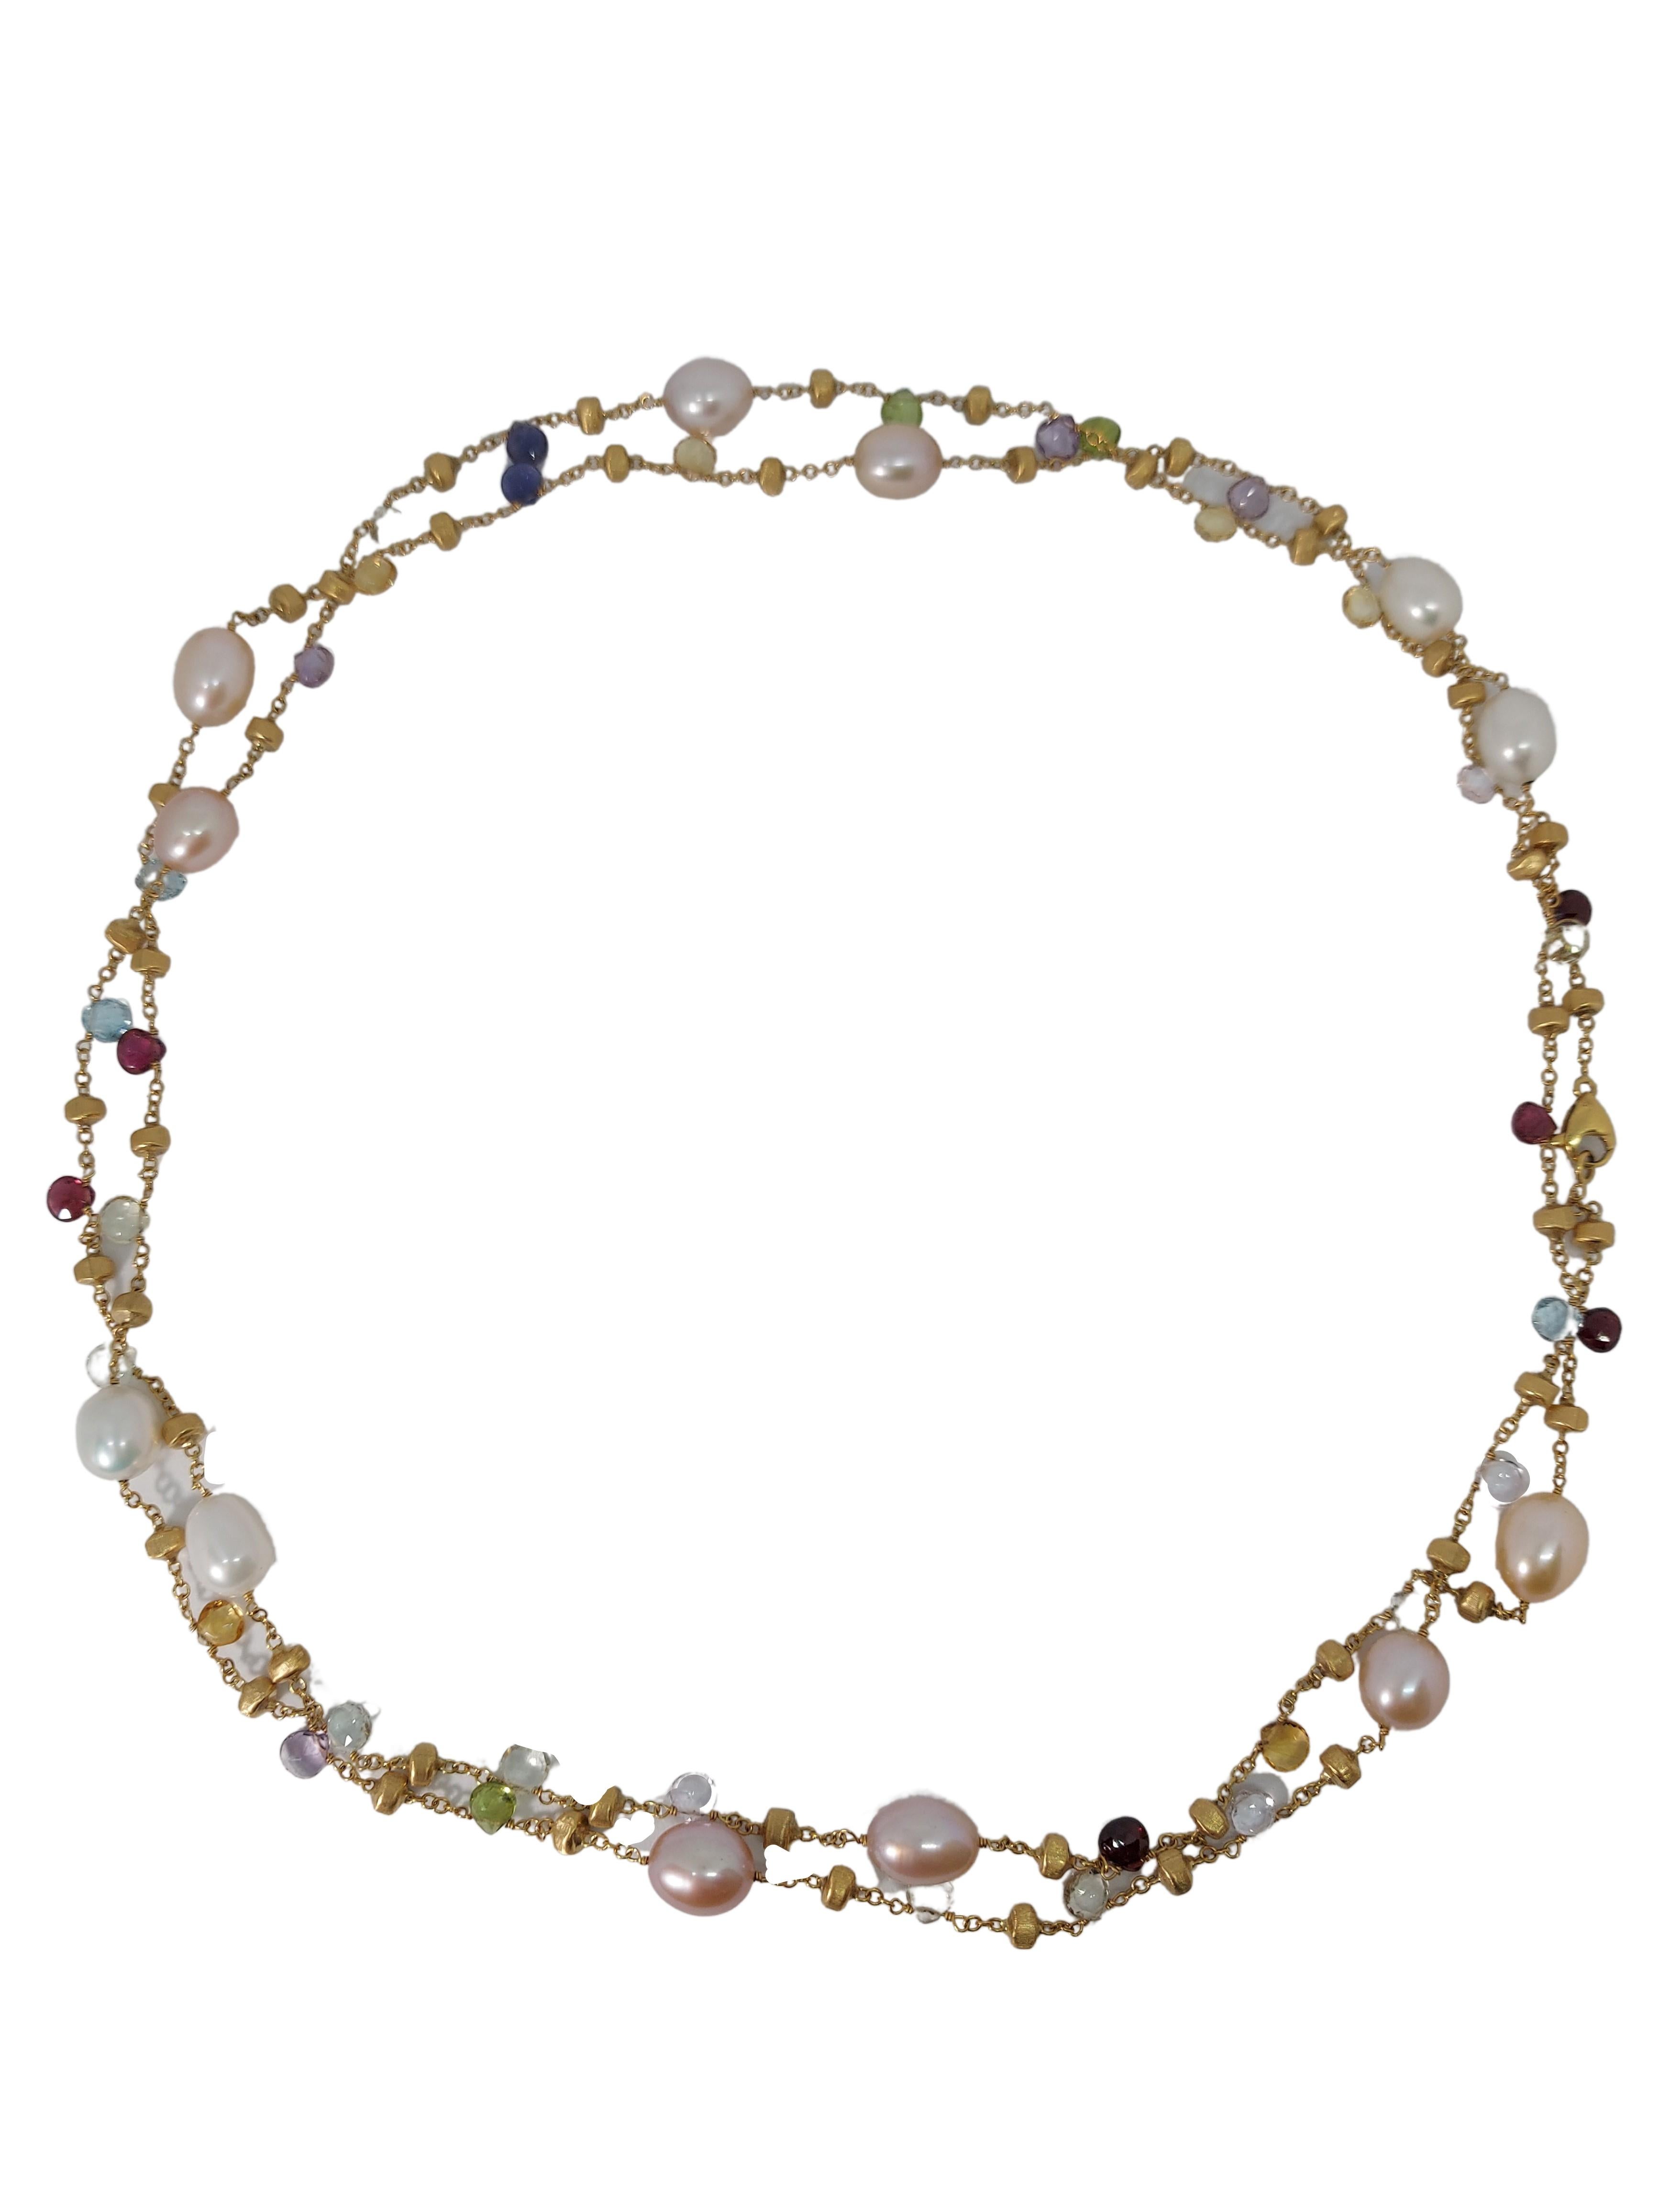 Briolette Cut 18kt Gold Marco Bicego Long Necklace, Paradise Collection, Pearls & Gemstones